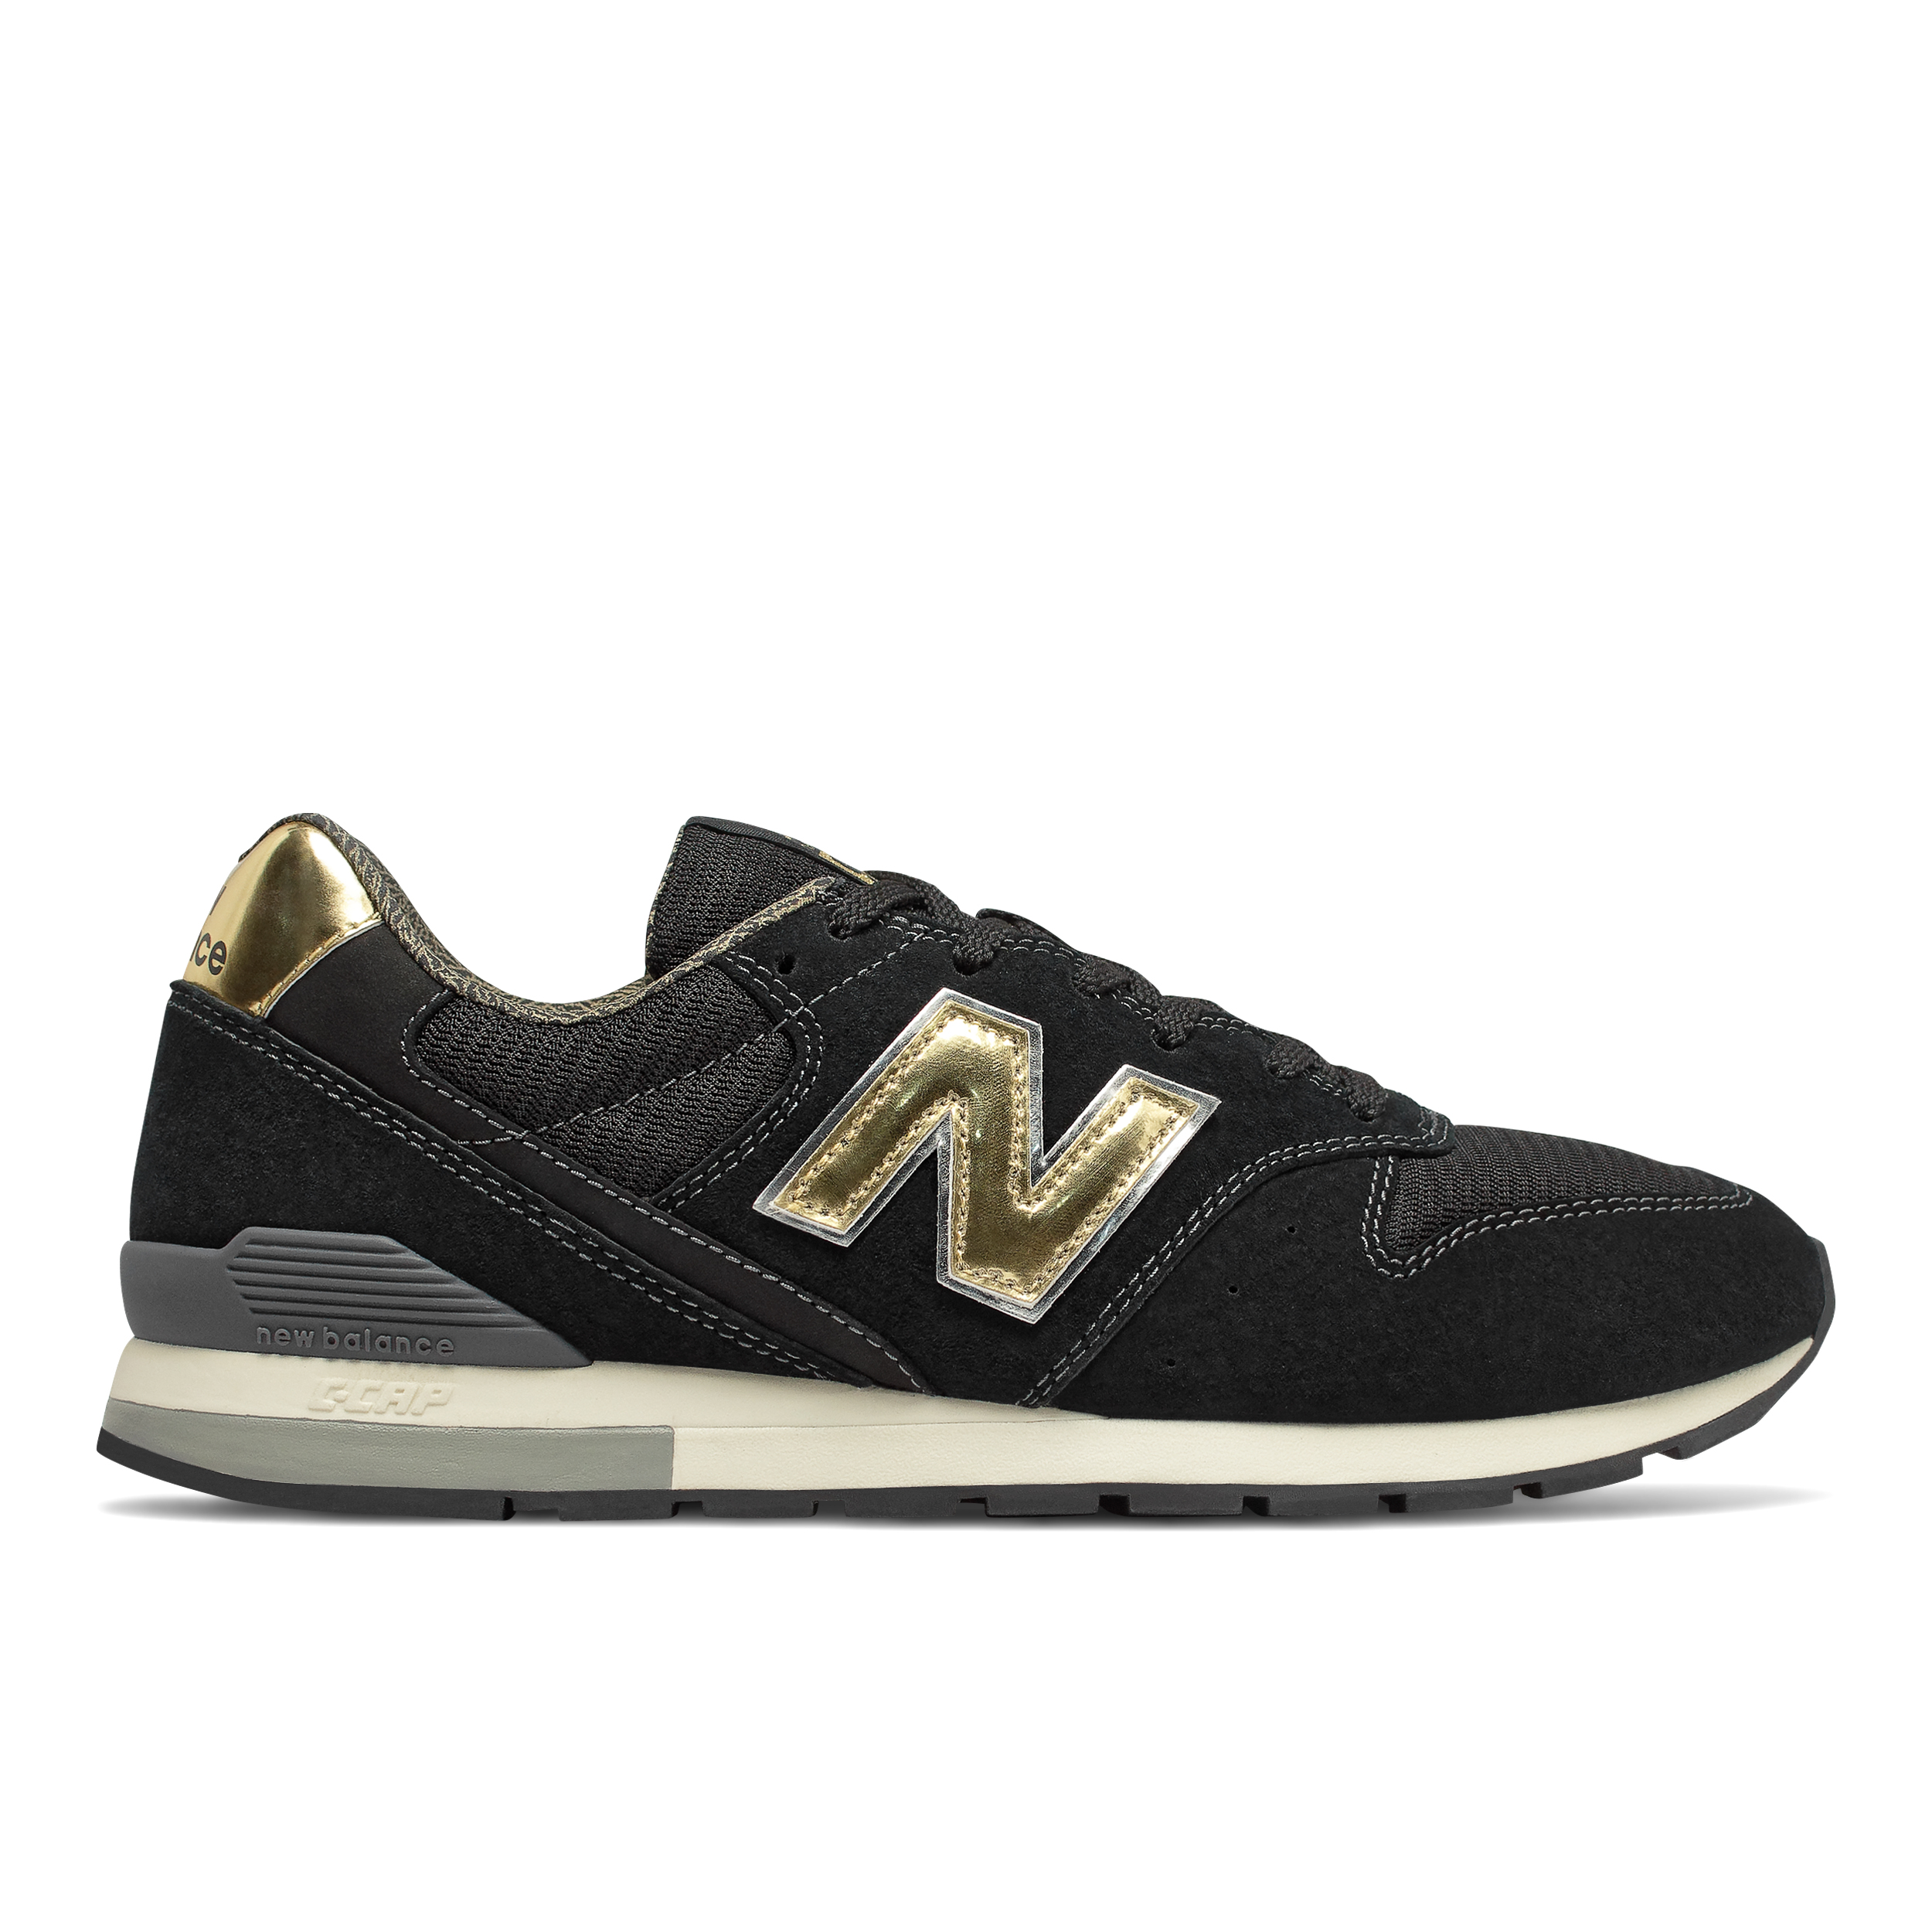 New Balance Ultimate Standard “996” Retail Store Limited Color 